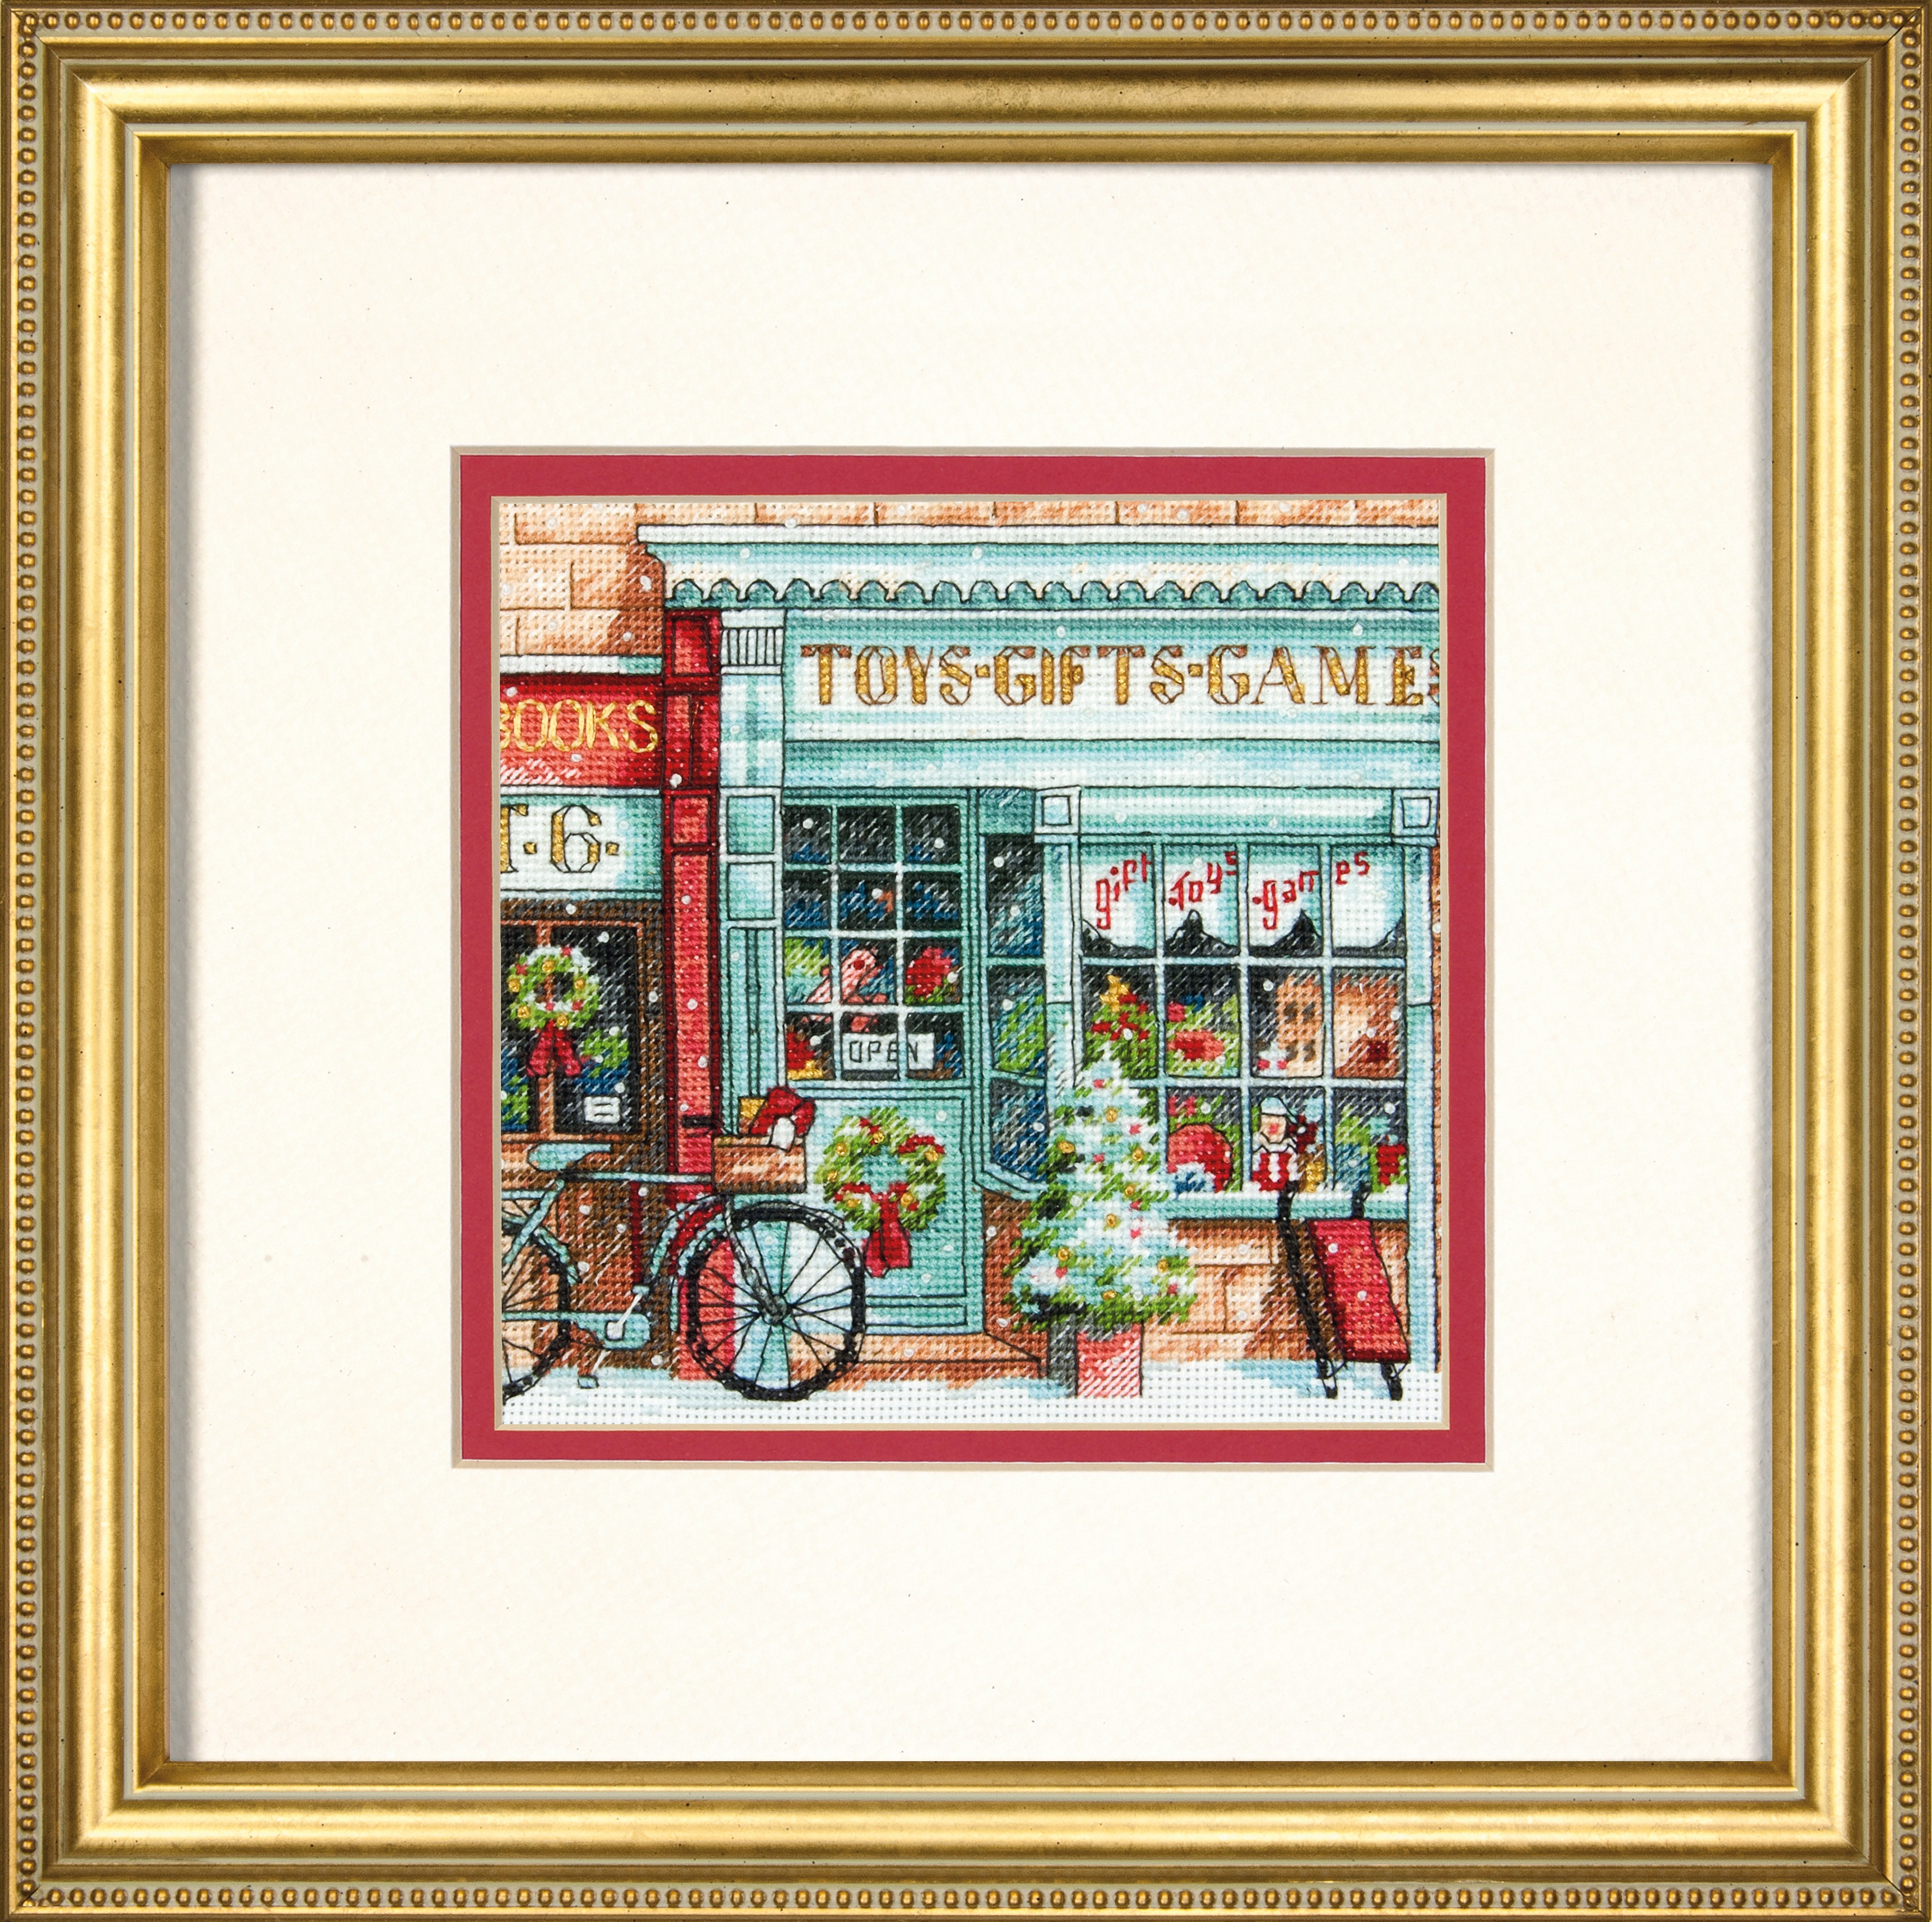 Dimensions: Counted Cross Stitch Kit: Toy Shoppe